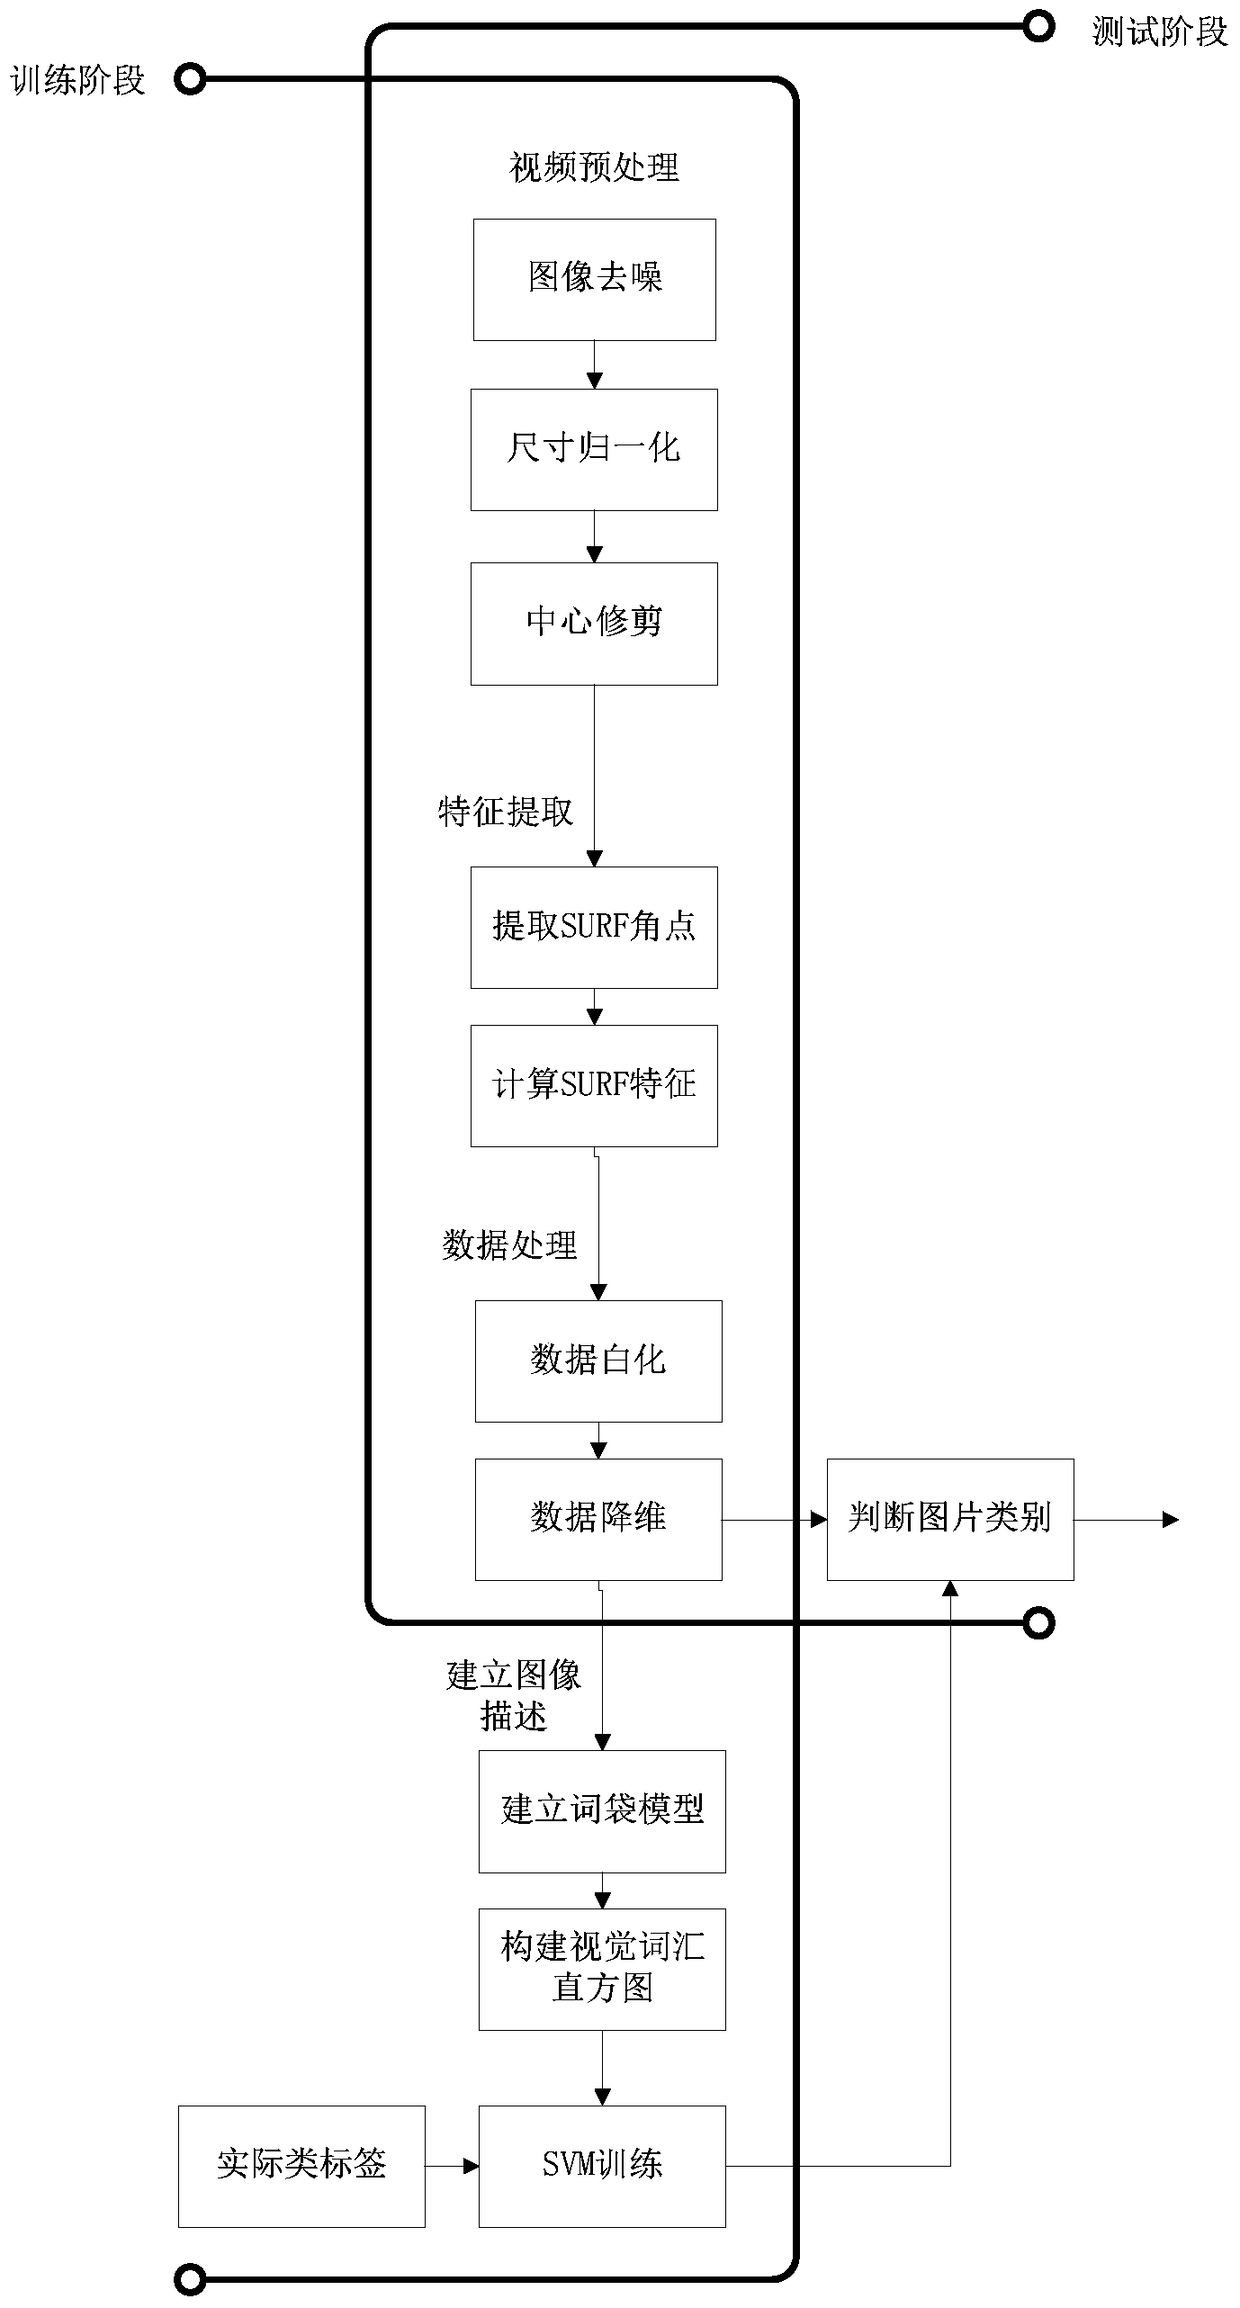 Image Object Recognition Method Based on Surf Feature